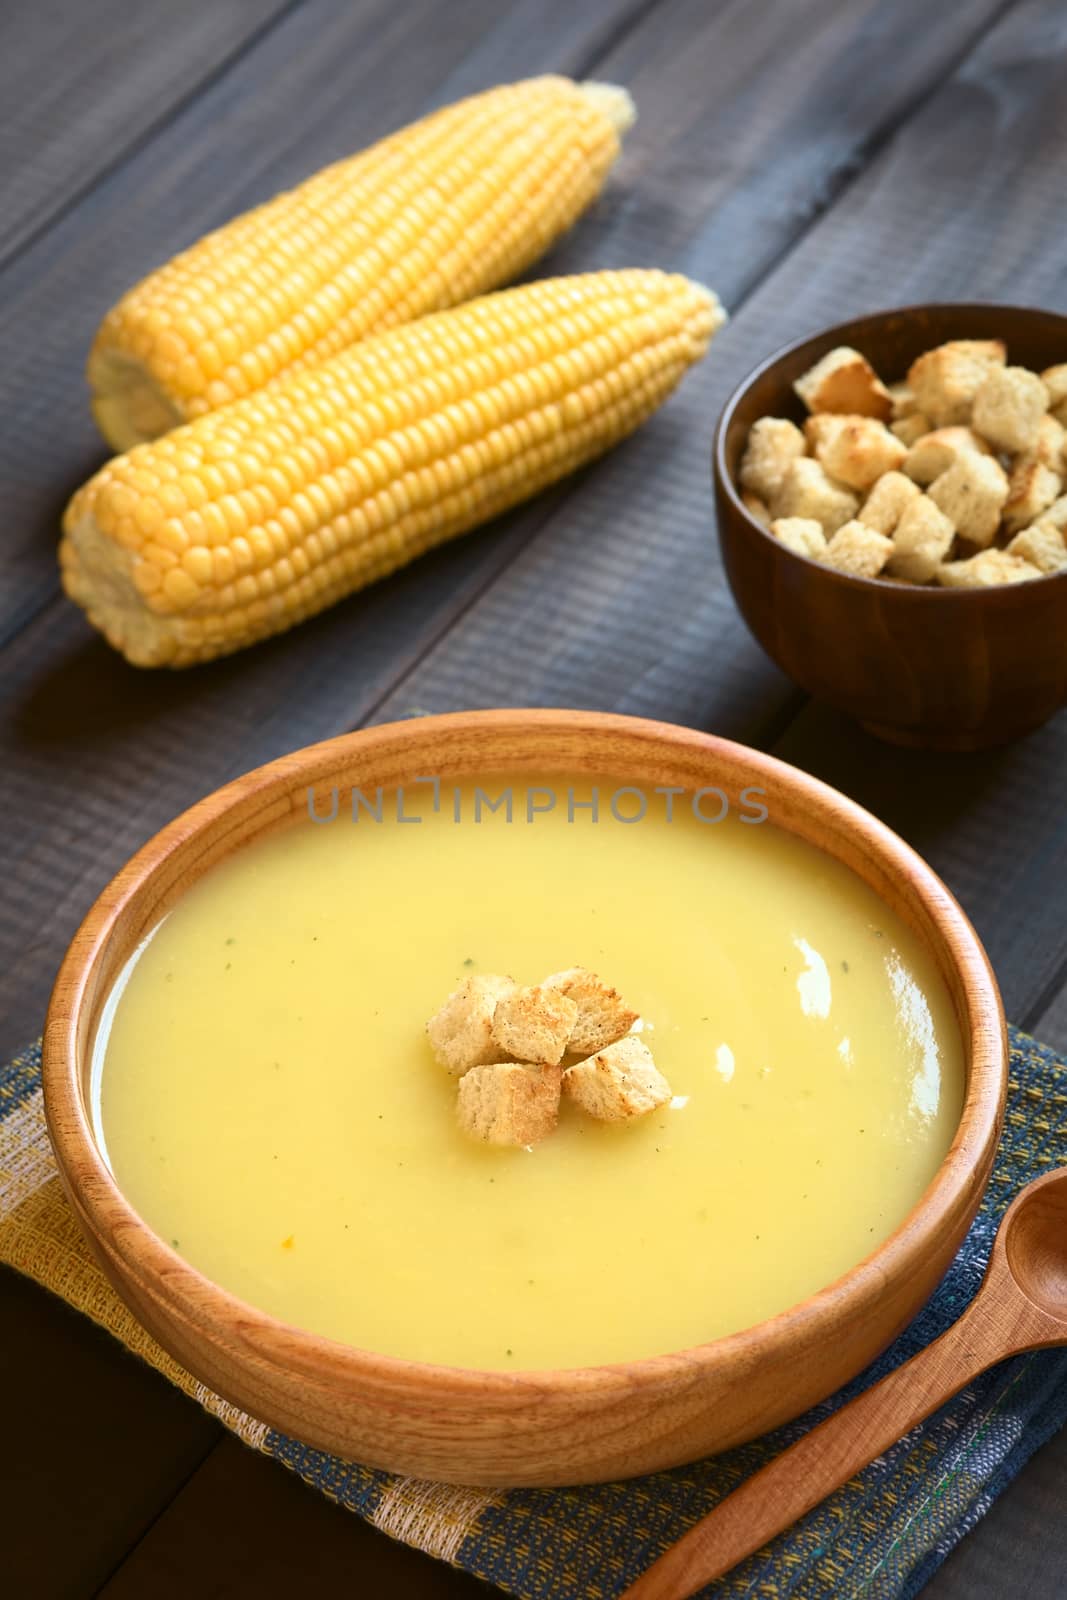 Cream of Corn Soup with Croutons by ildi